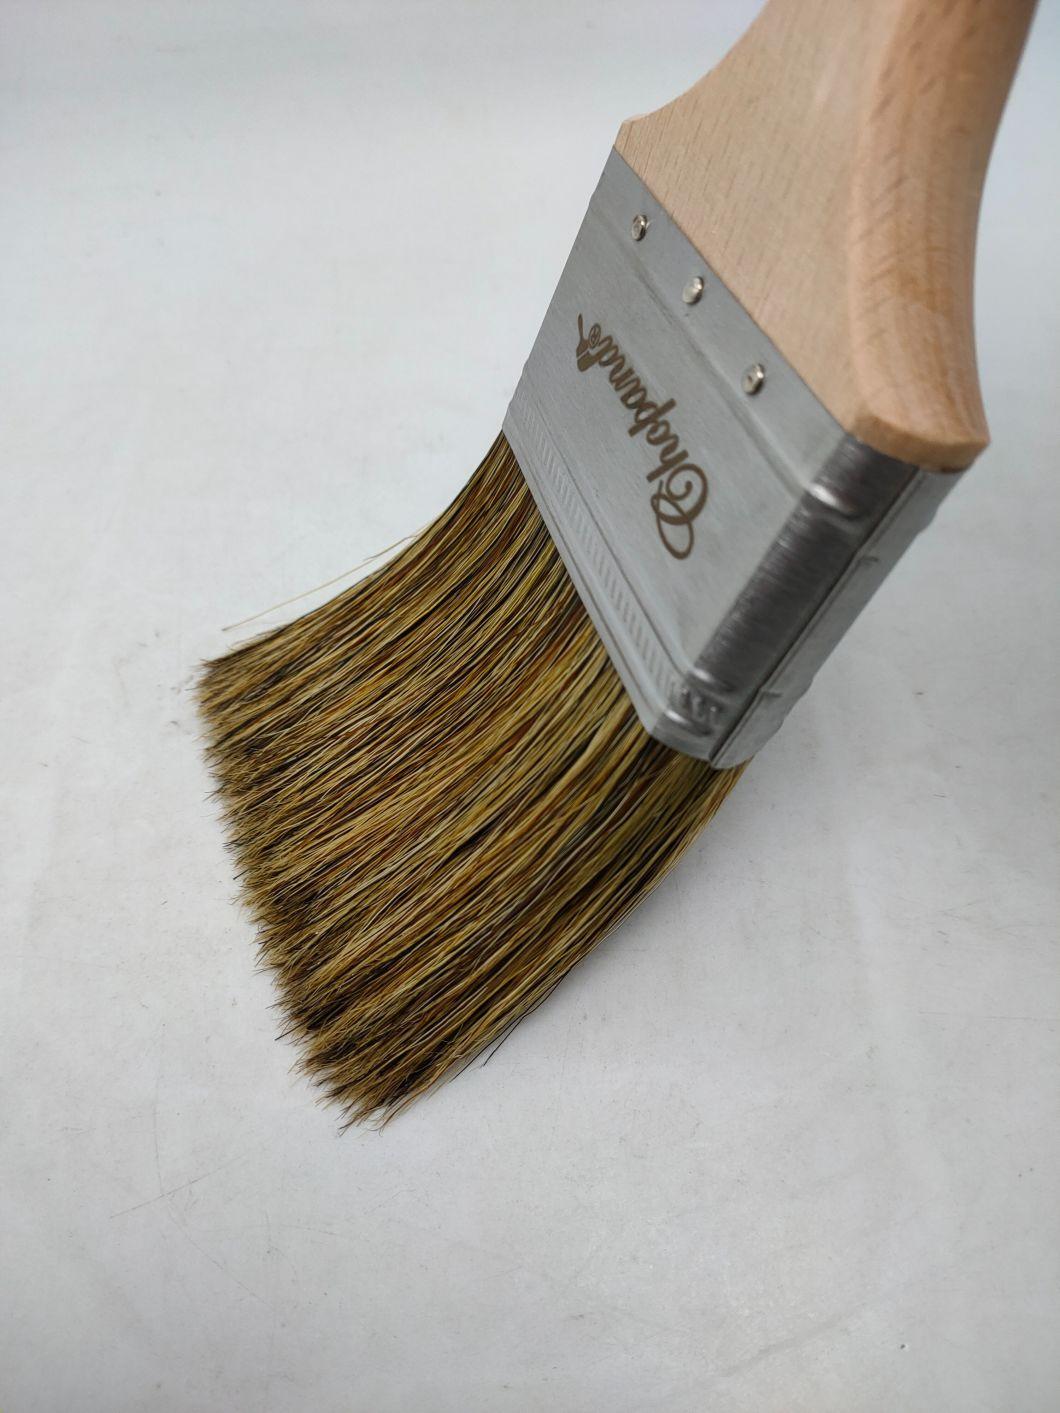 Chopand Professional Paint Brush for All Paints & Stains